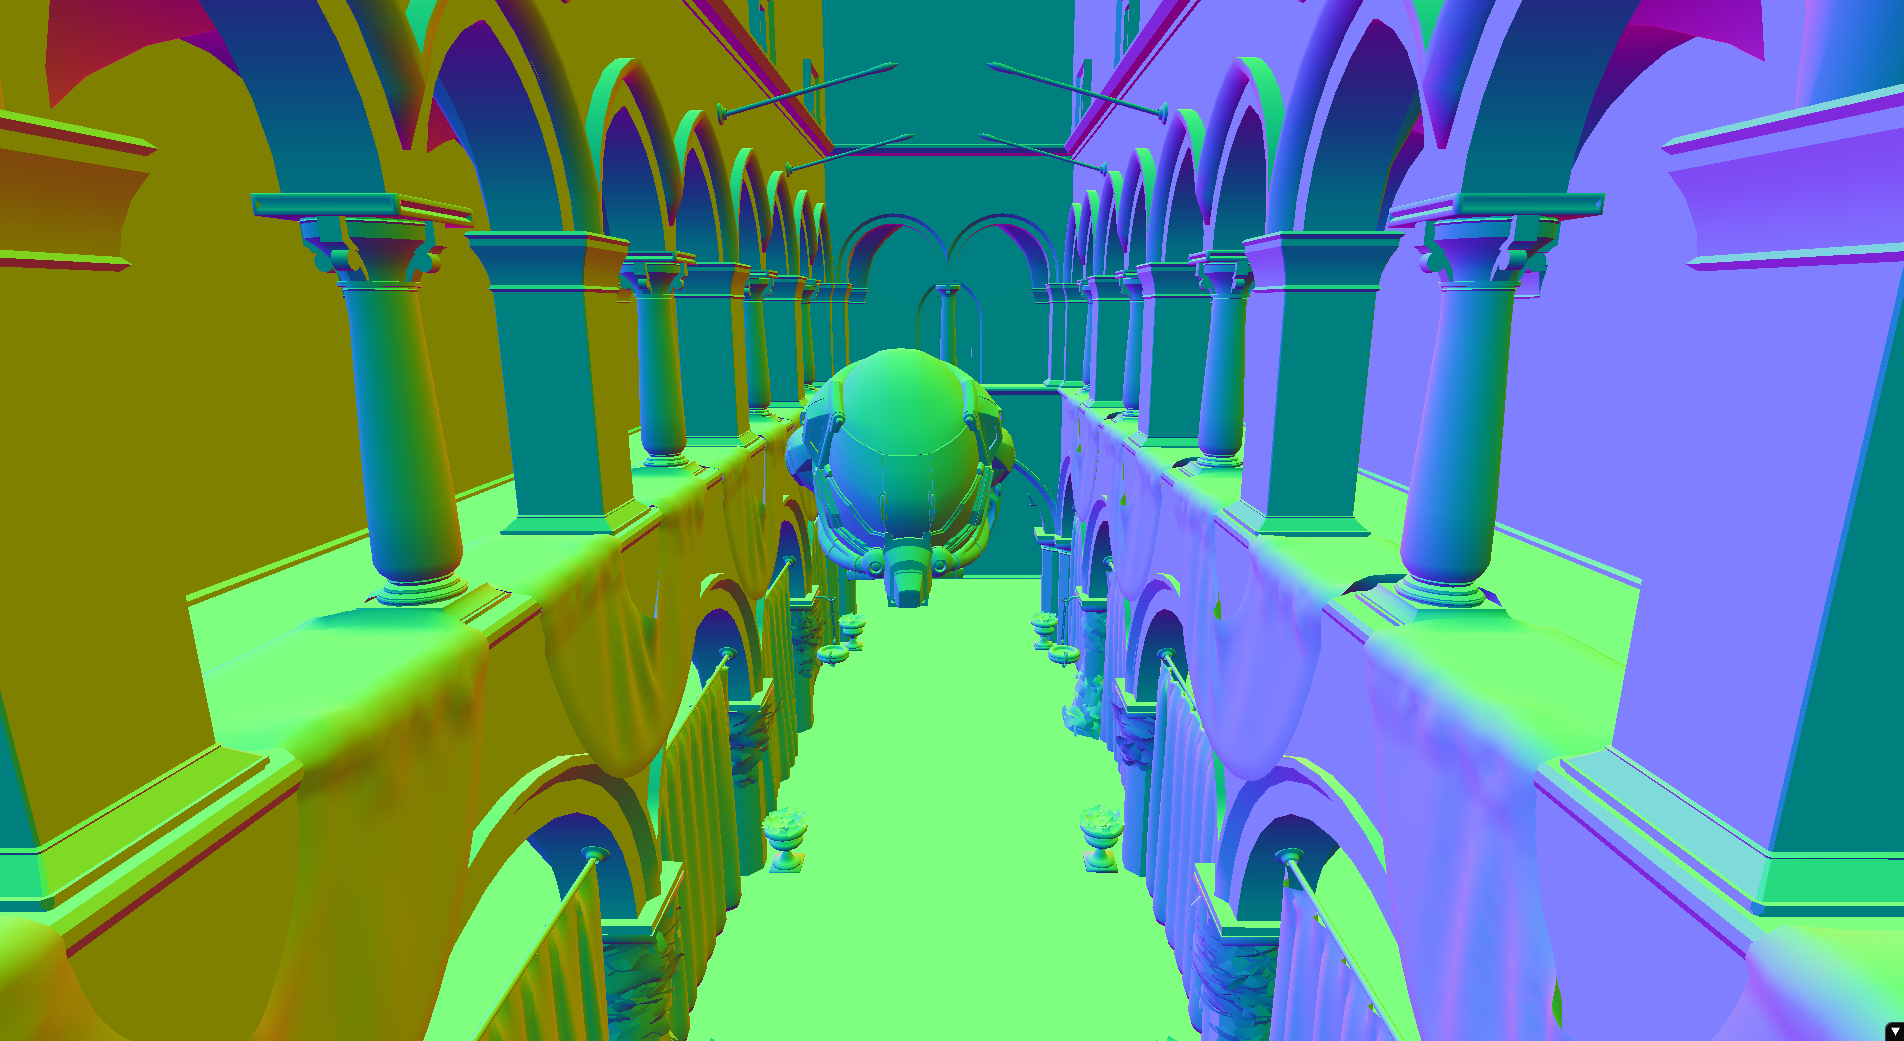 Without normal map visualization